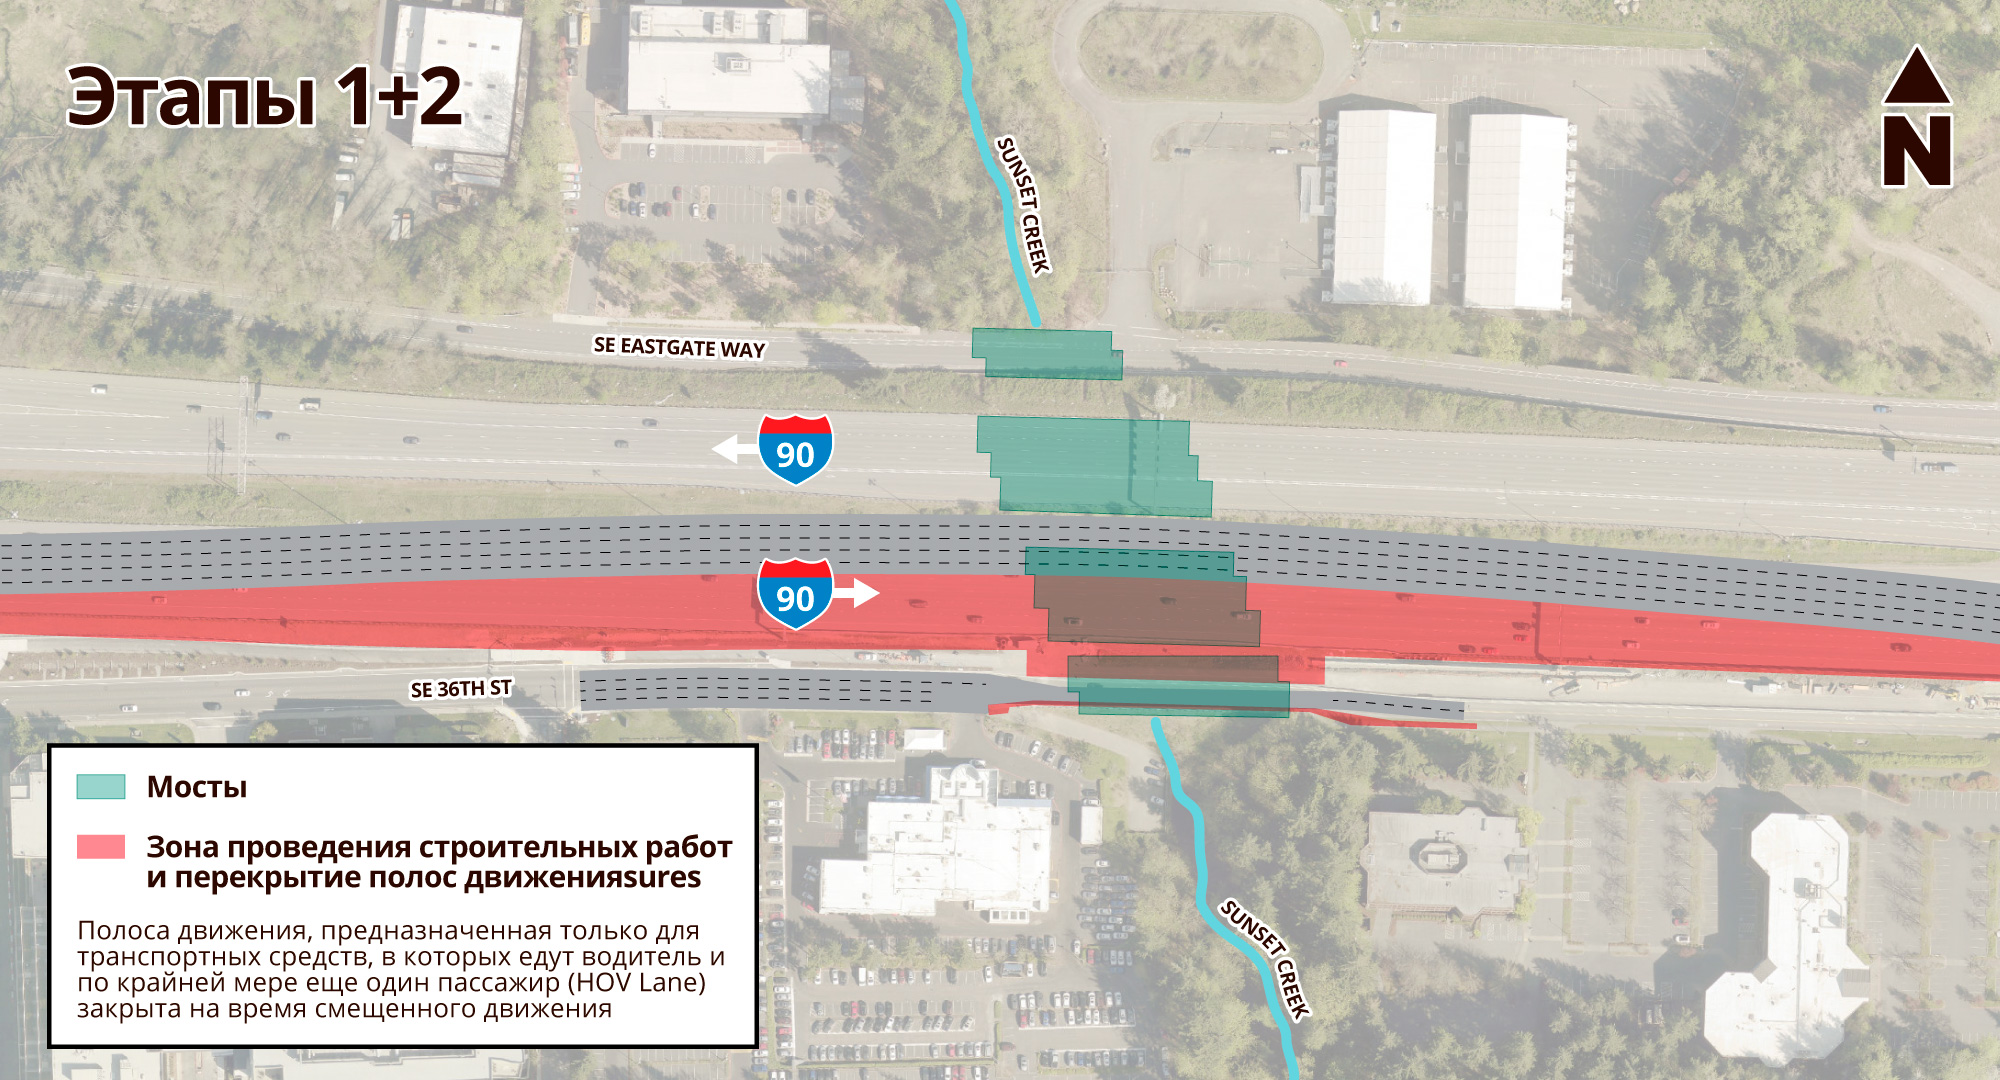 I-90 West Fish Passage – Sunset Creek construction stages 1 and 2